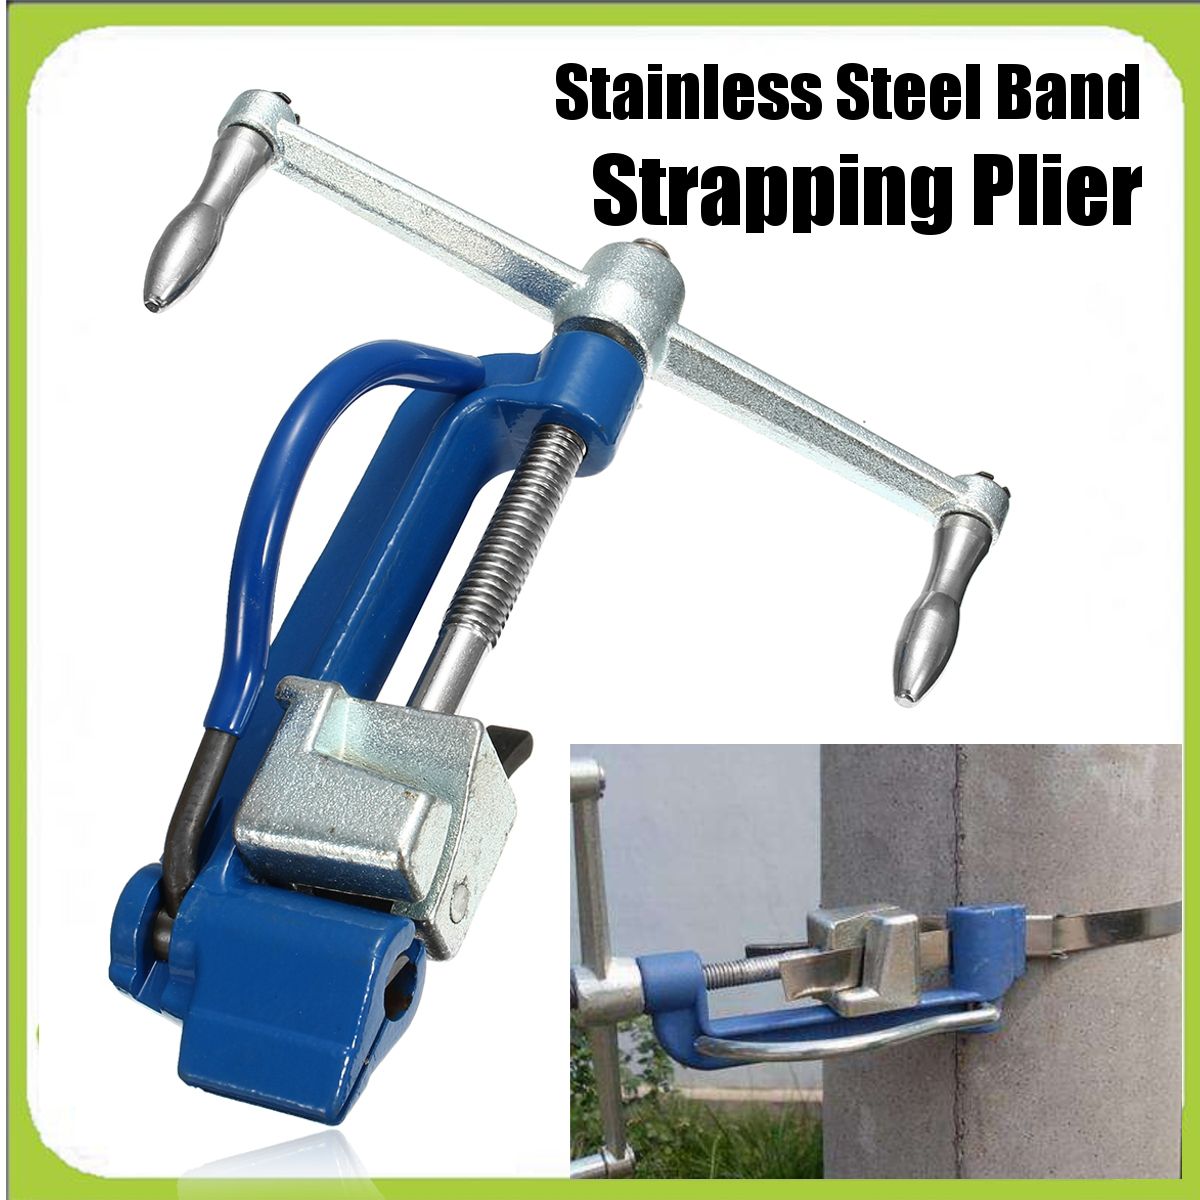 Band-Strapping-Pliers-Tool-Strapper-WrapperPacker-Manual-BindingWrapping-Metal-Tie-Cutting-Tool-1338670